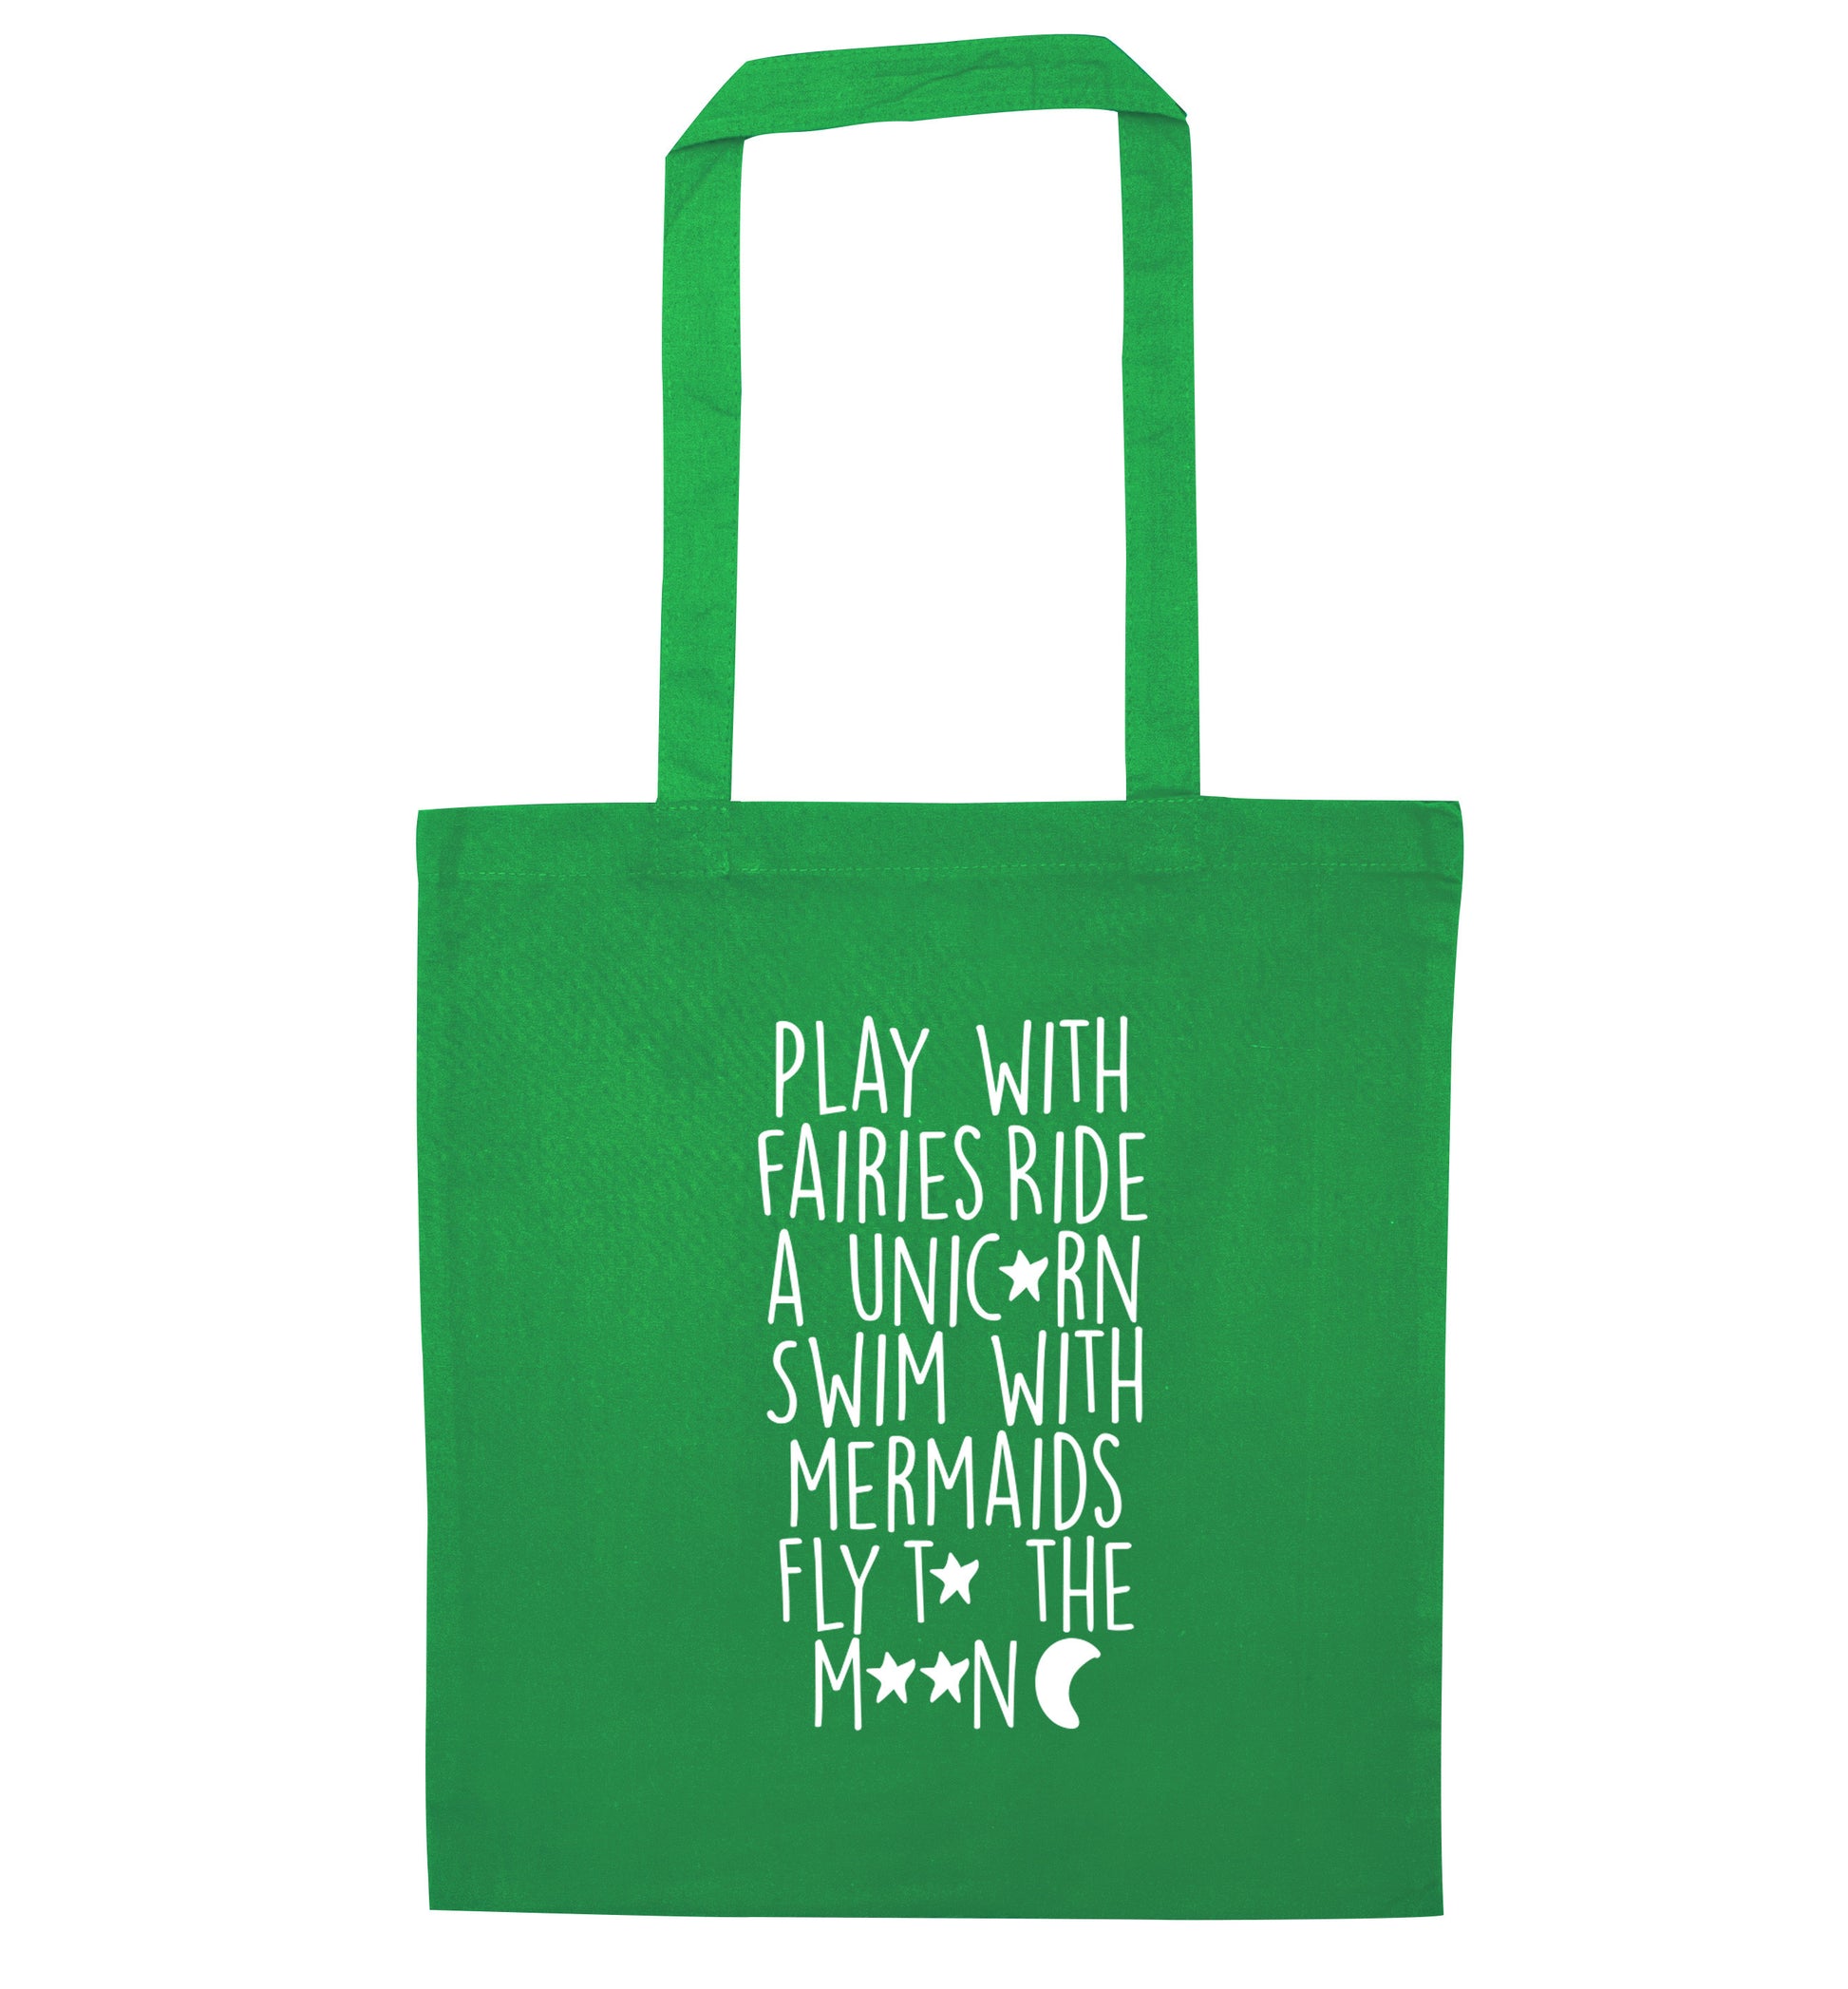 Play with fairies ride a unicorn swim with mermaids fly to the moon green tote bag